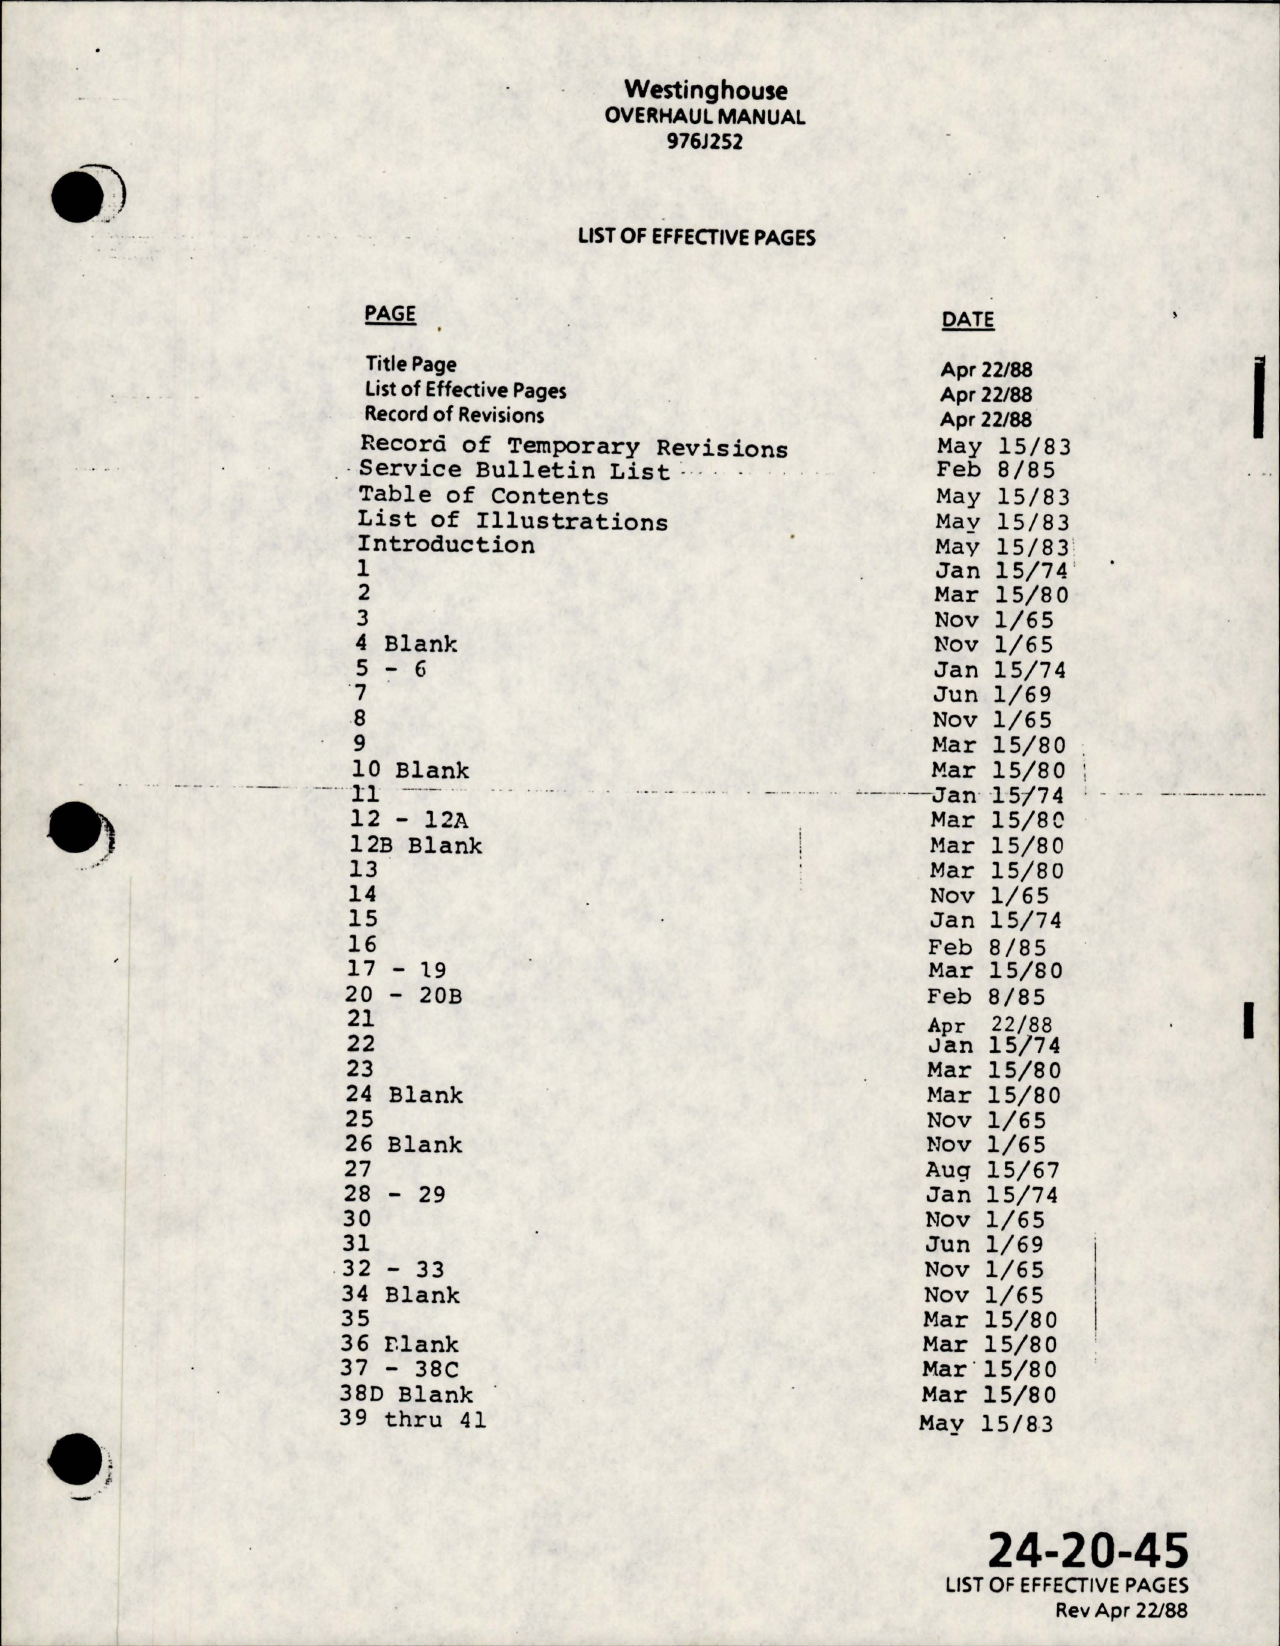 Sample page 5 from AirCorps Library document: Maintenance Manual w Parts List for AC Generator - Parts 976J252-3 and 976J252-6